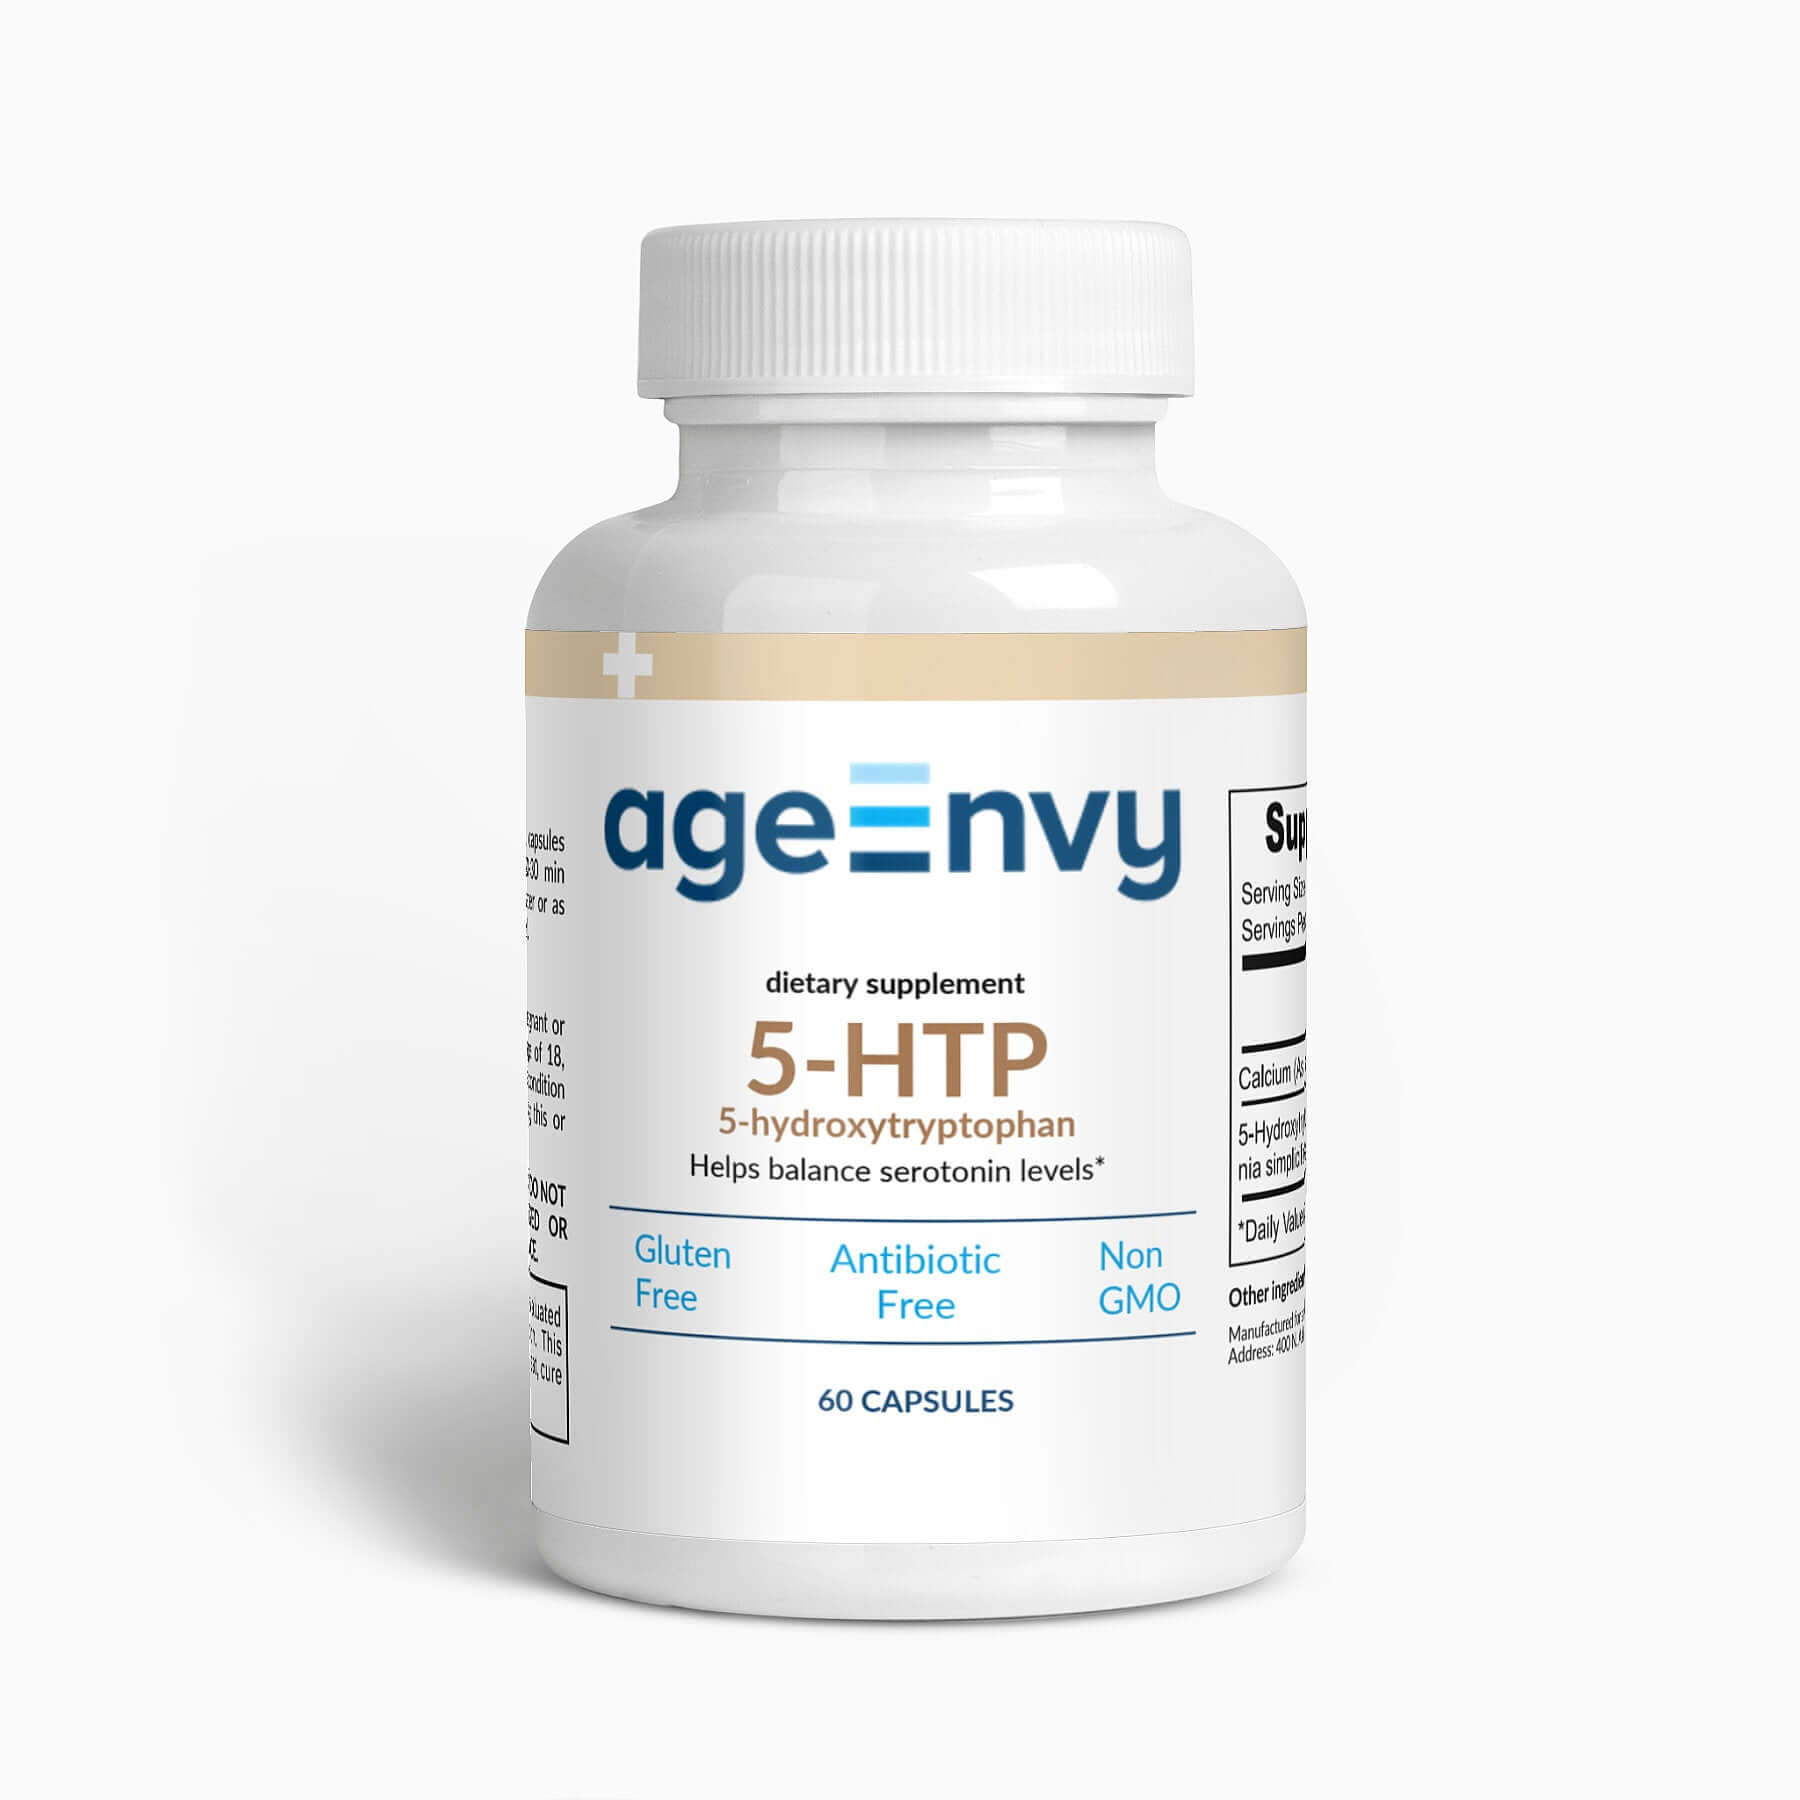 Bottle of 5 HTP Supplement offered by AgeEnvy